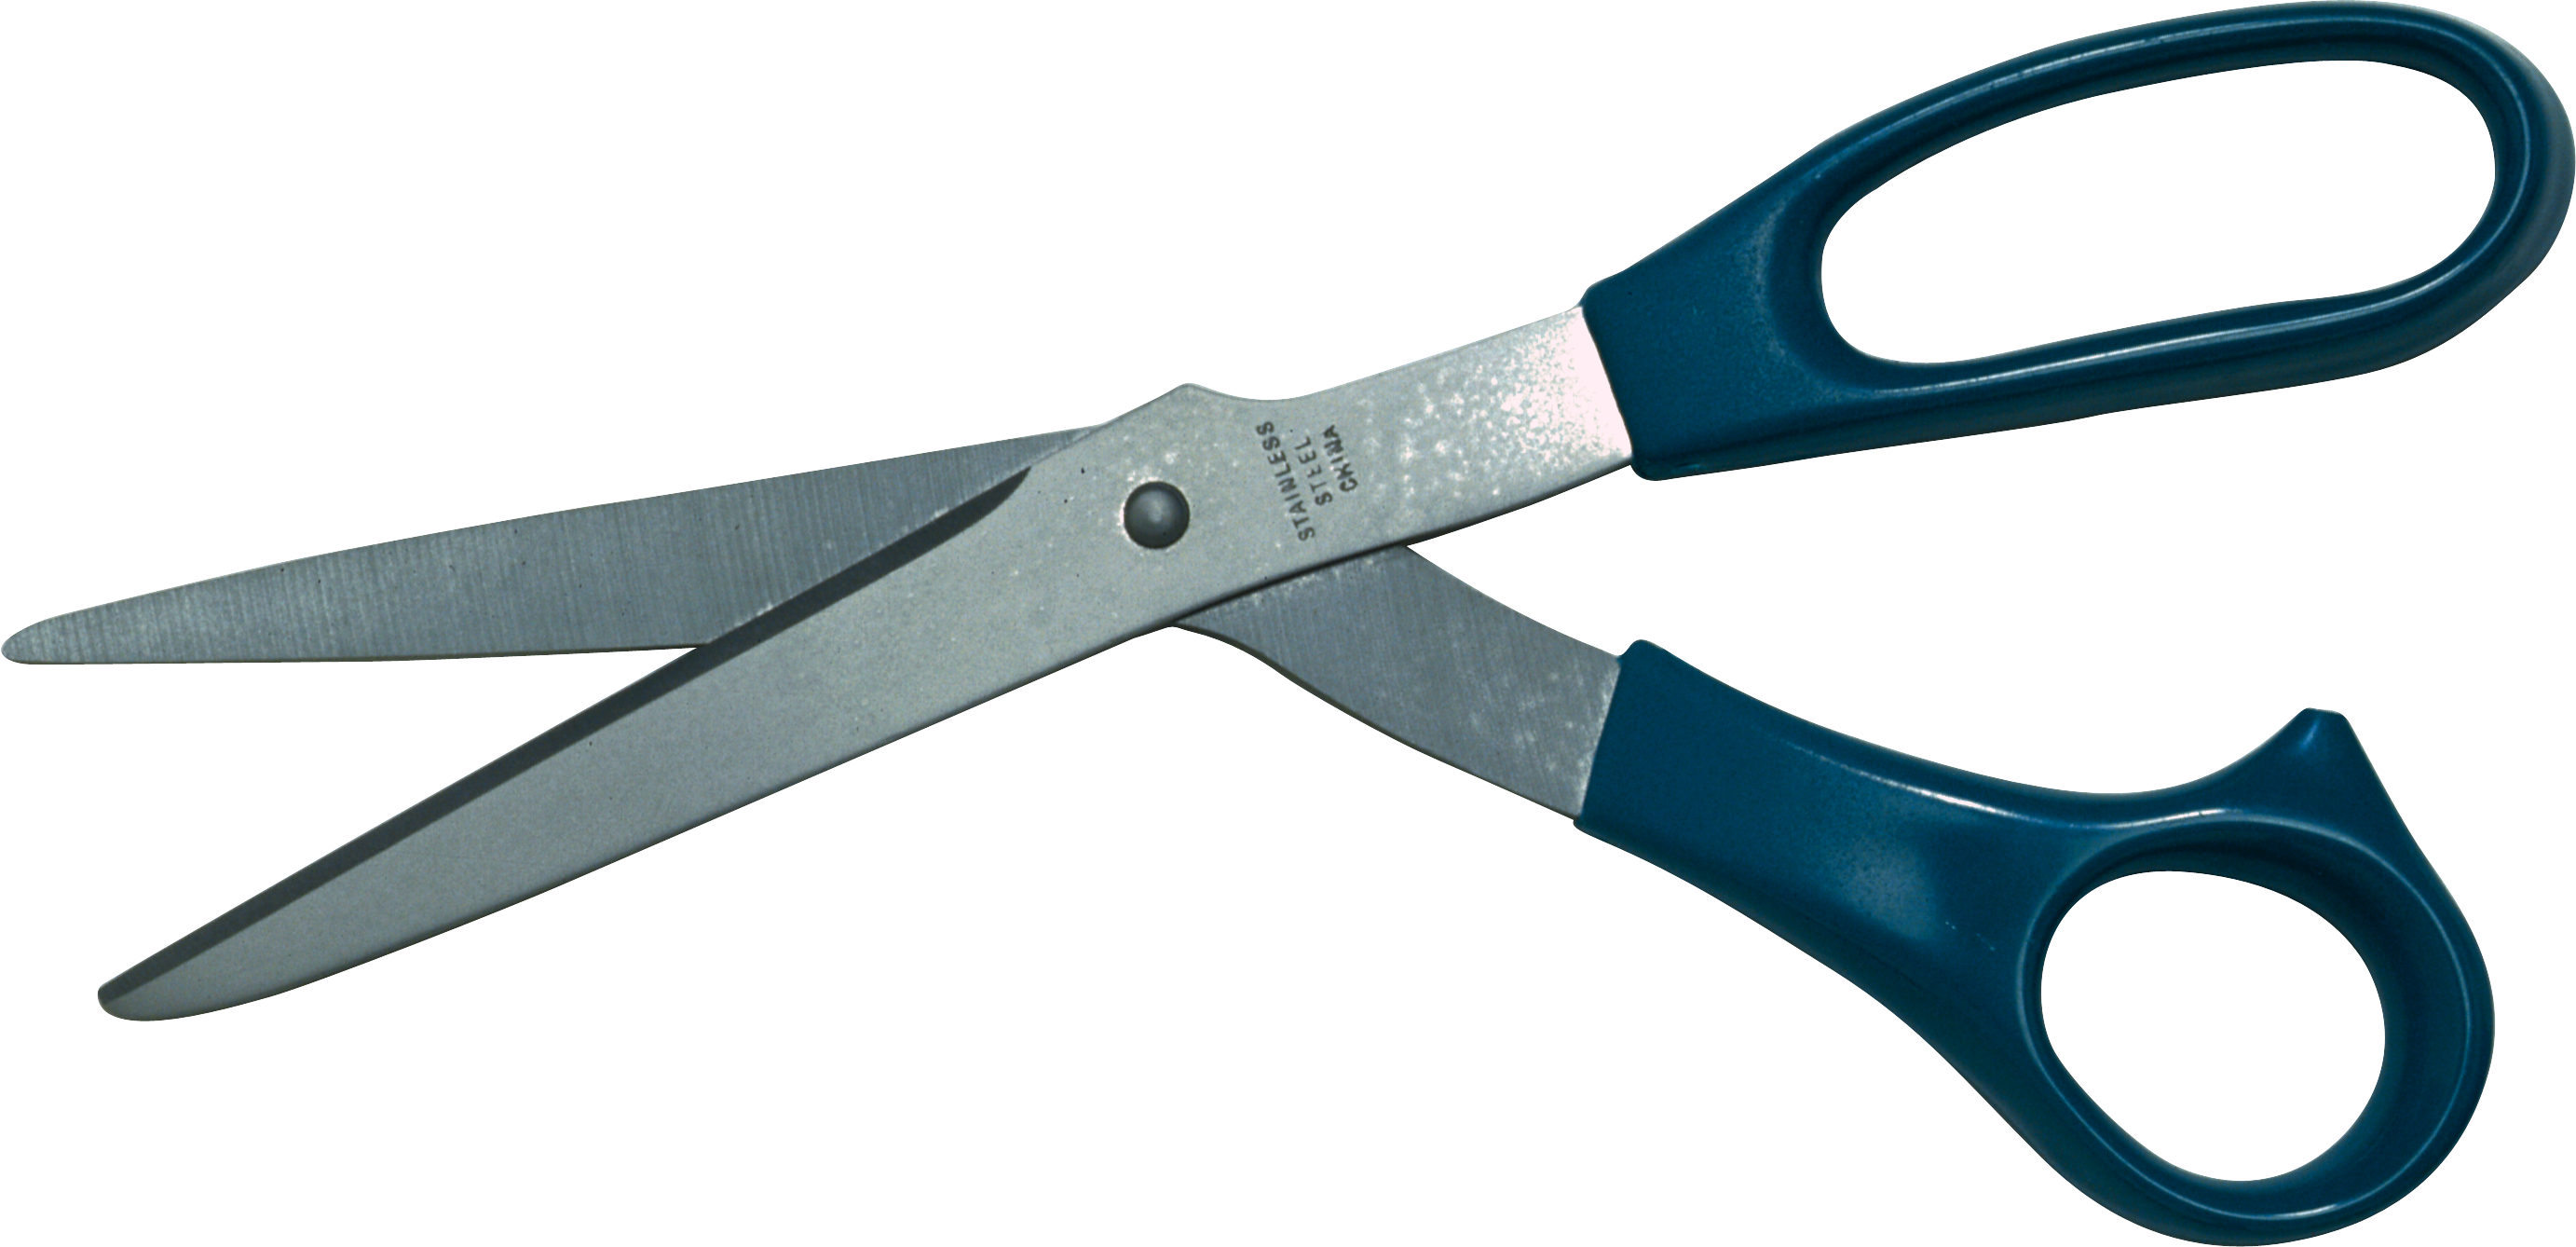 scissors png images for download crazypngm #23286